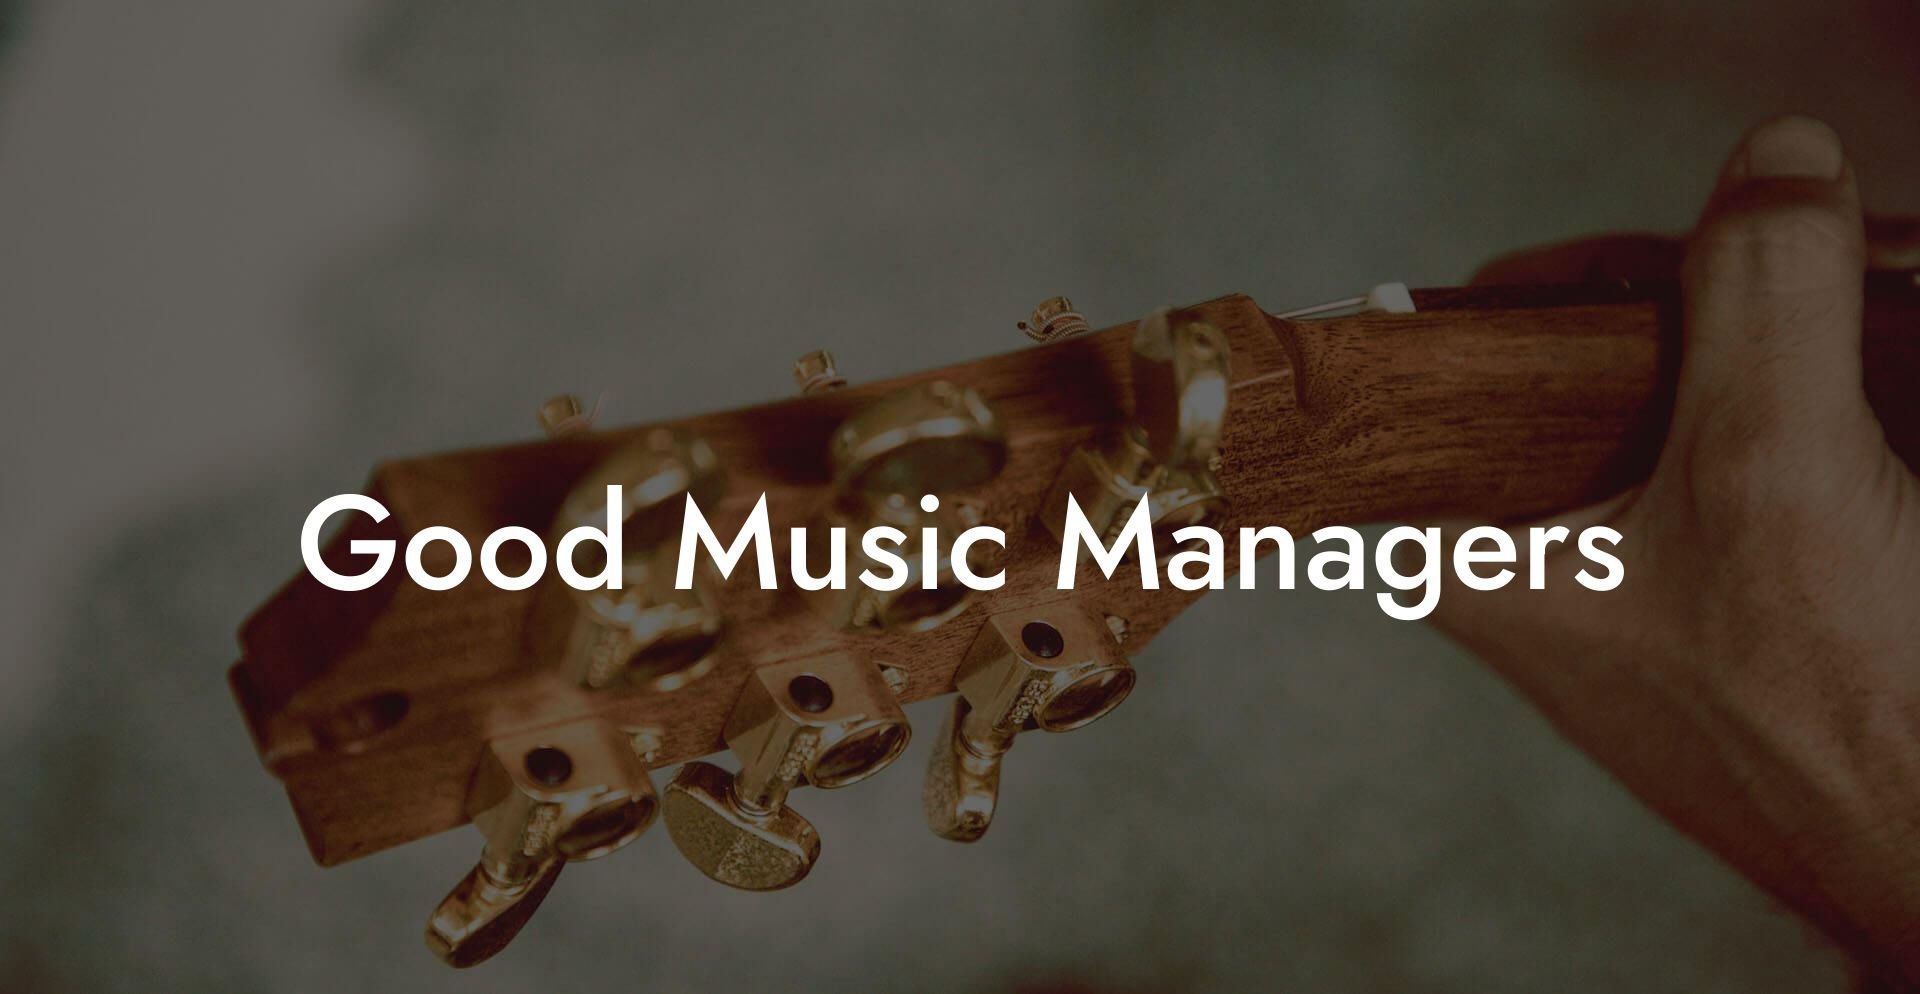 Good Music Managers